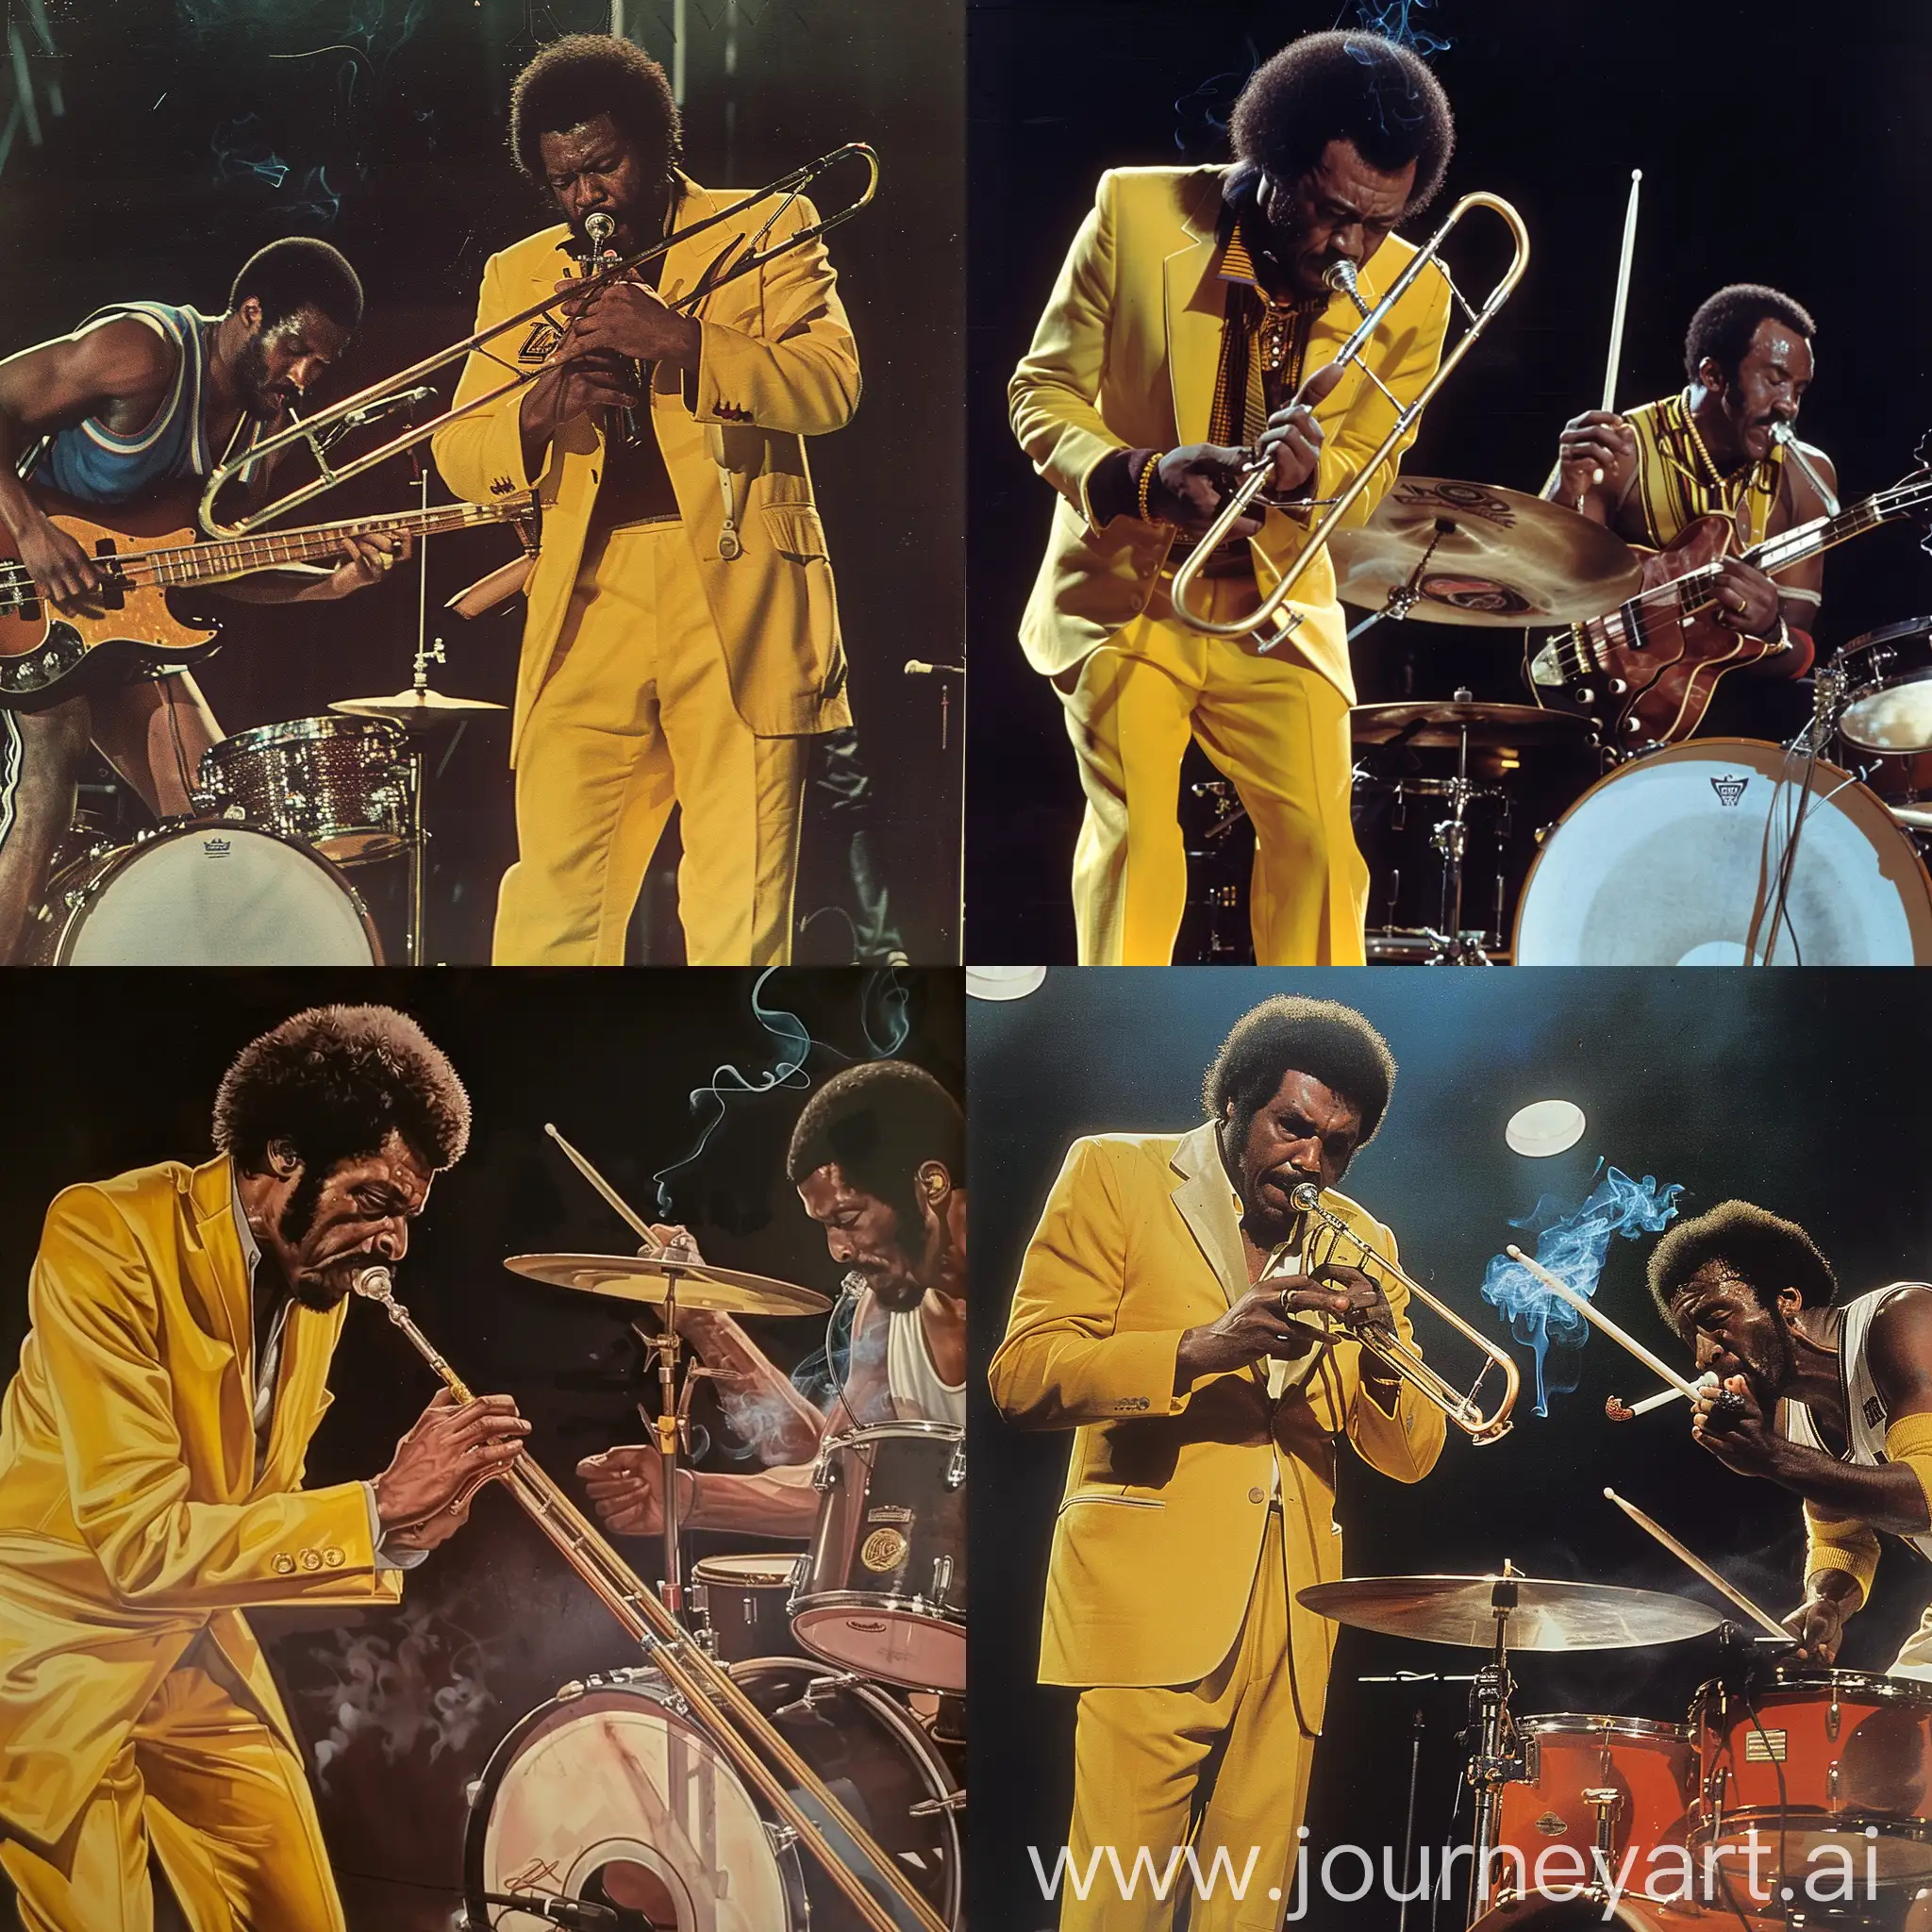 Celebrity-Jazz-Jam-Session-Bruce-Lee-on-Trombone-Kareem-Abdul-Jabbar-on-Bass-and-Cassius-Clay-on-Drums